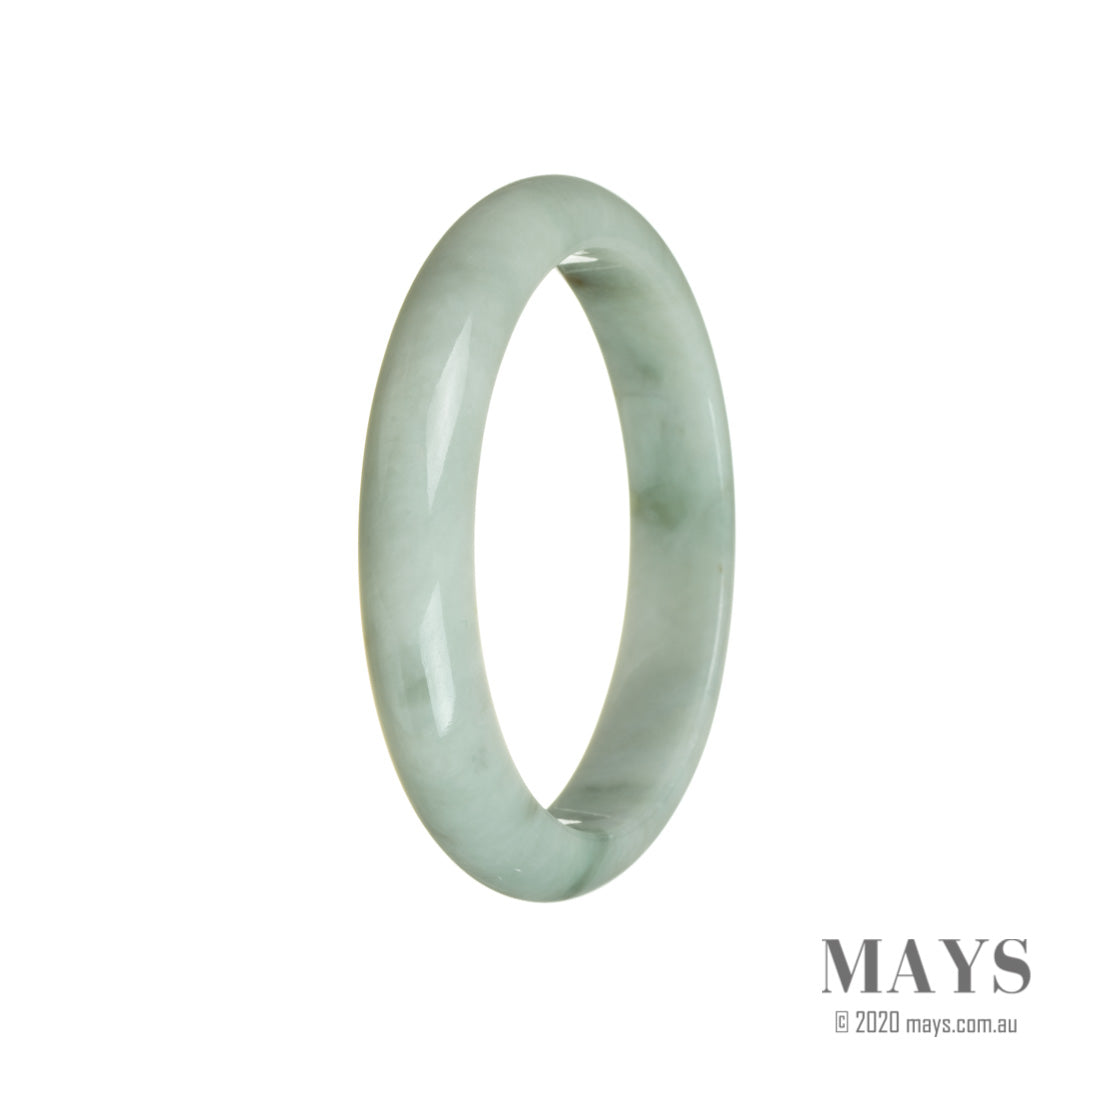 A close-up image of a beautiful jade bangle bracelet with a half-moon shape. The jadeite stone is untreated and features a vibrant green color with subtle grey undertones. The bracelet has a diameter of 59mm and is a stunning piece from MAYS GEMS.